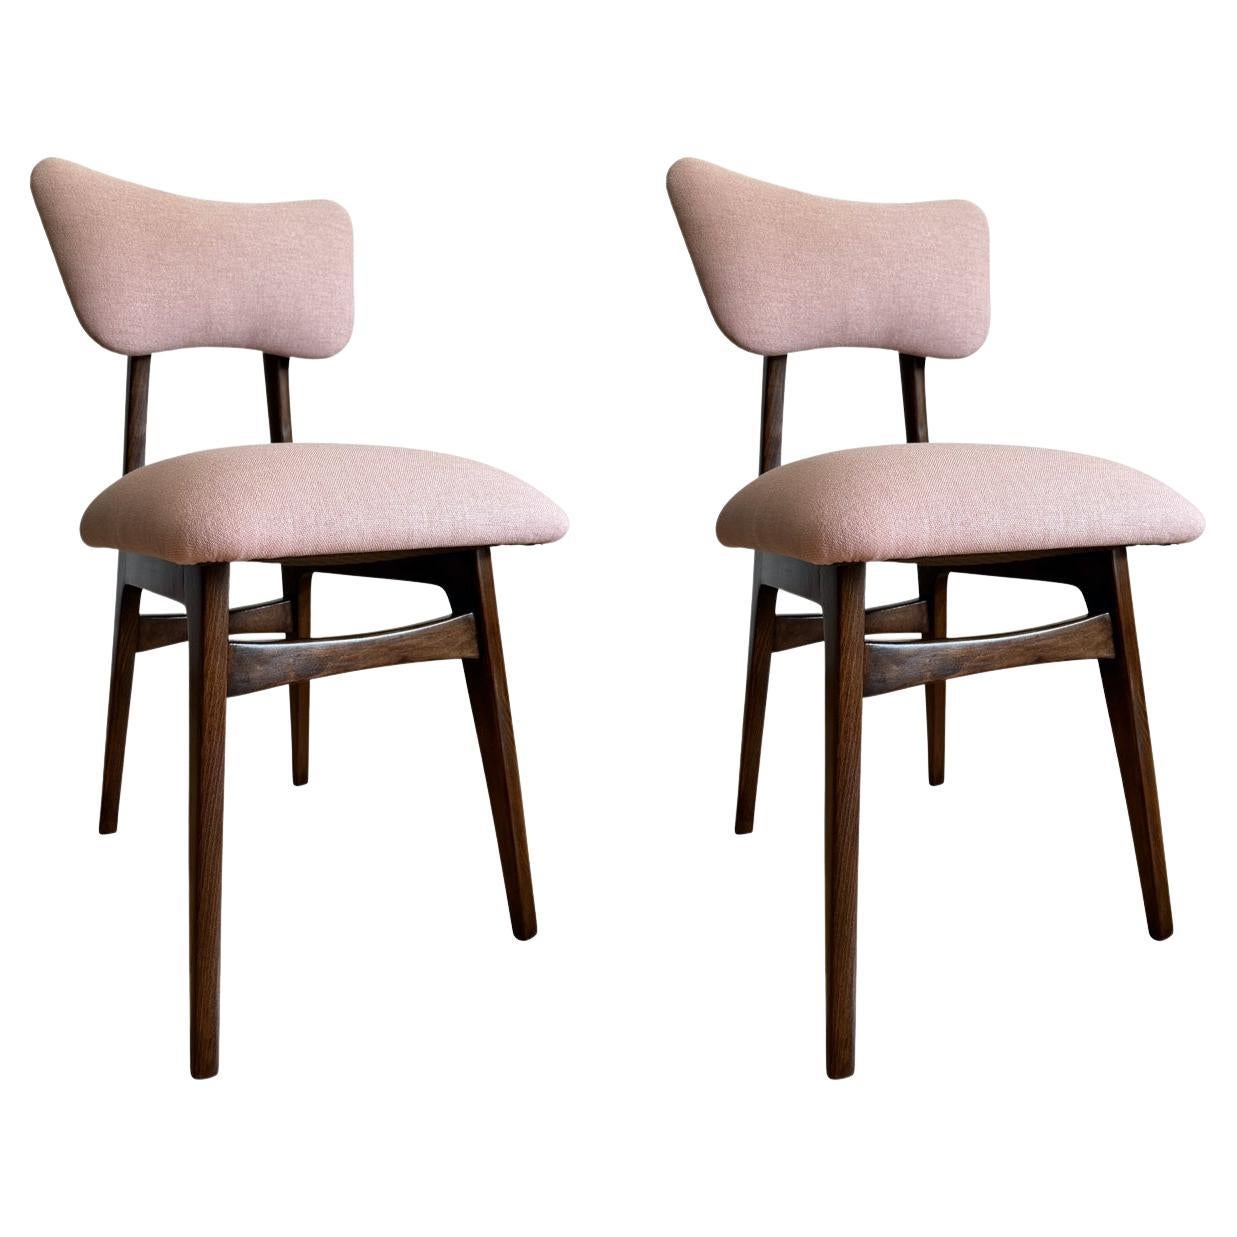 Set of 2 Midcentury Light Pink Dining Chairs, Europe, 1960s For Sale